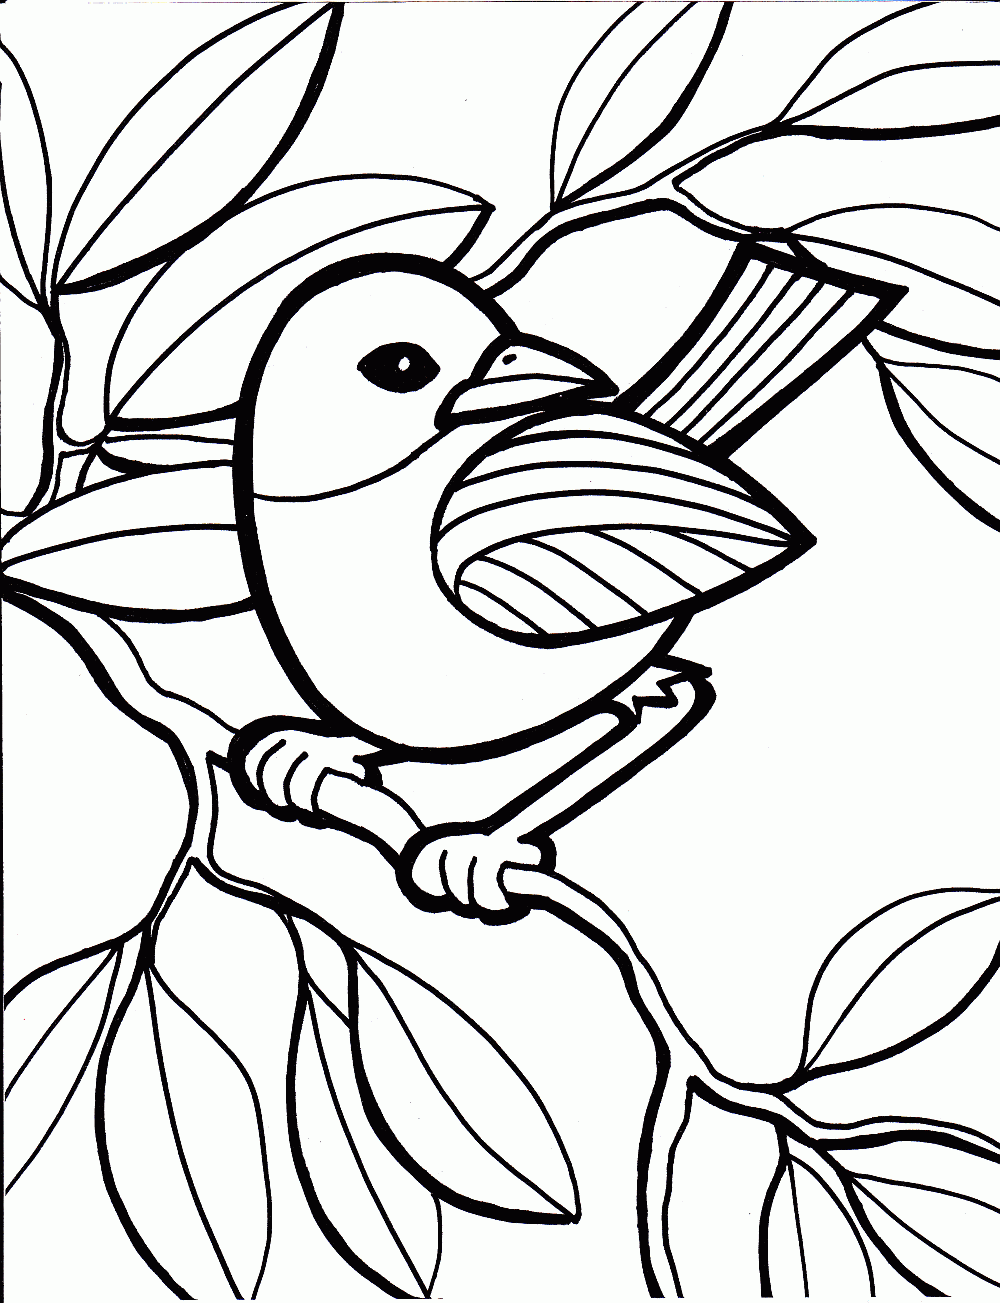 Download Childrens Day Coloring Pages Coloring Kids - Coloring Kids